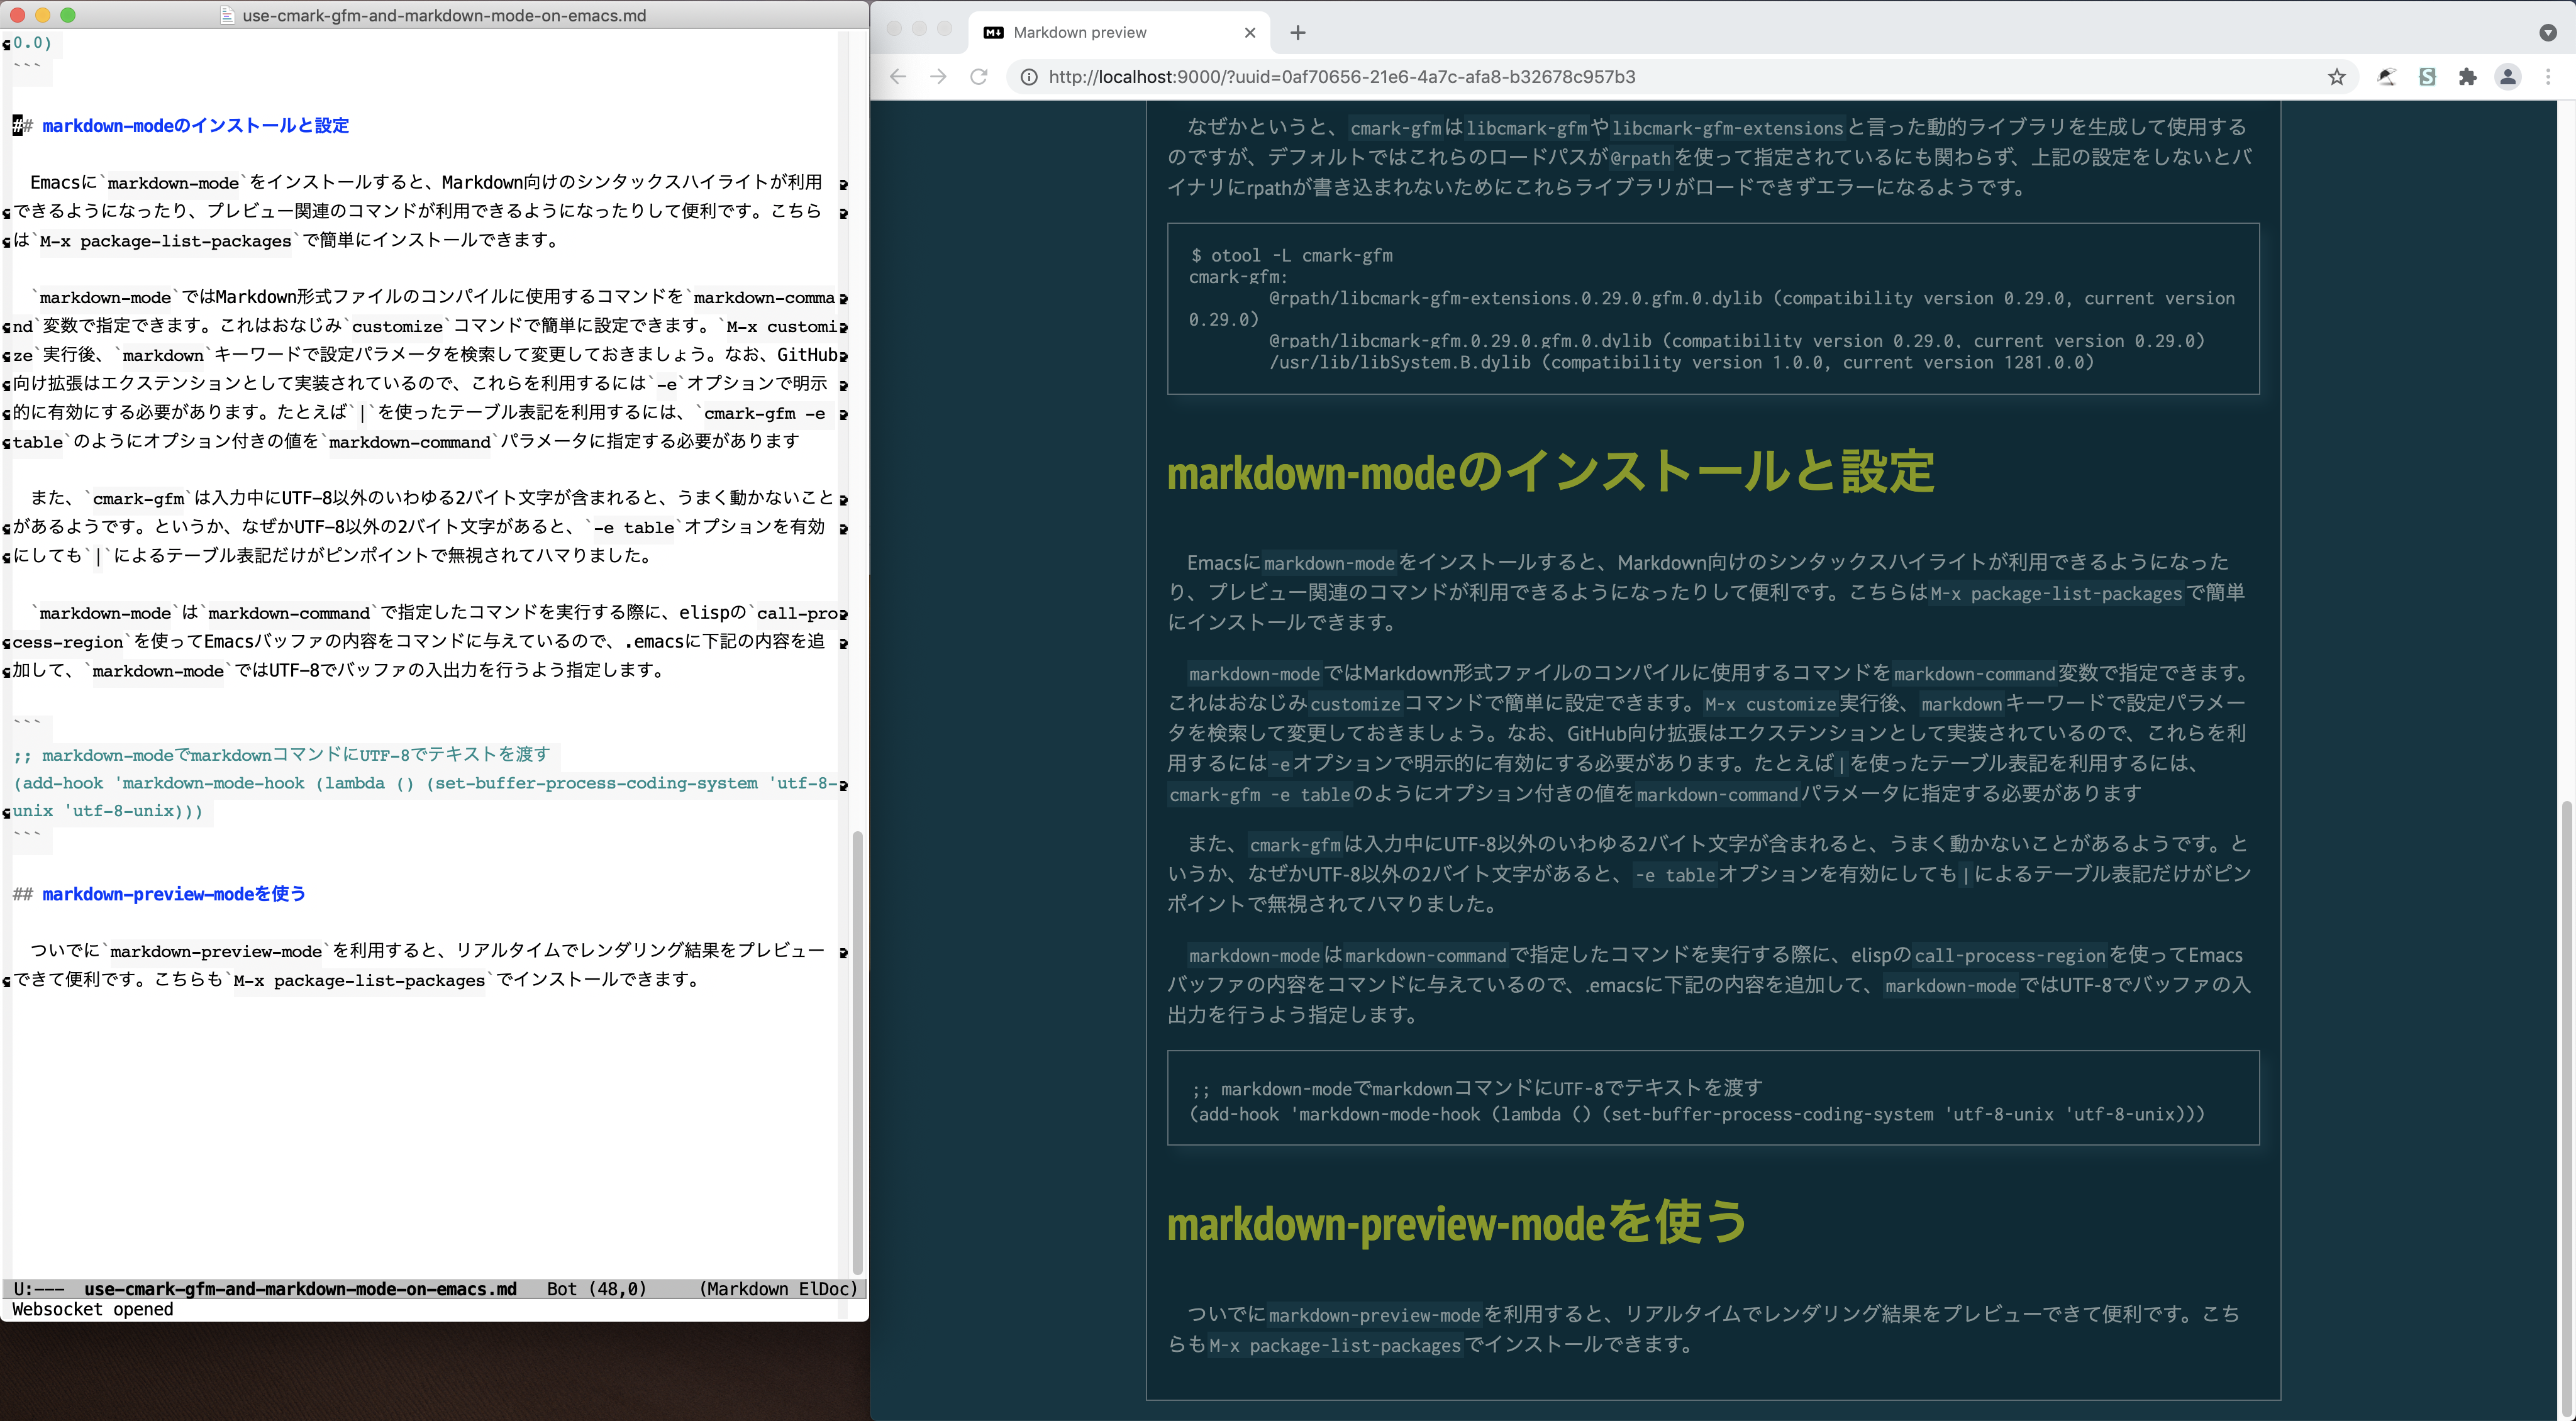 markdown-preview-mode